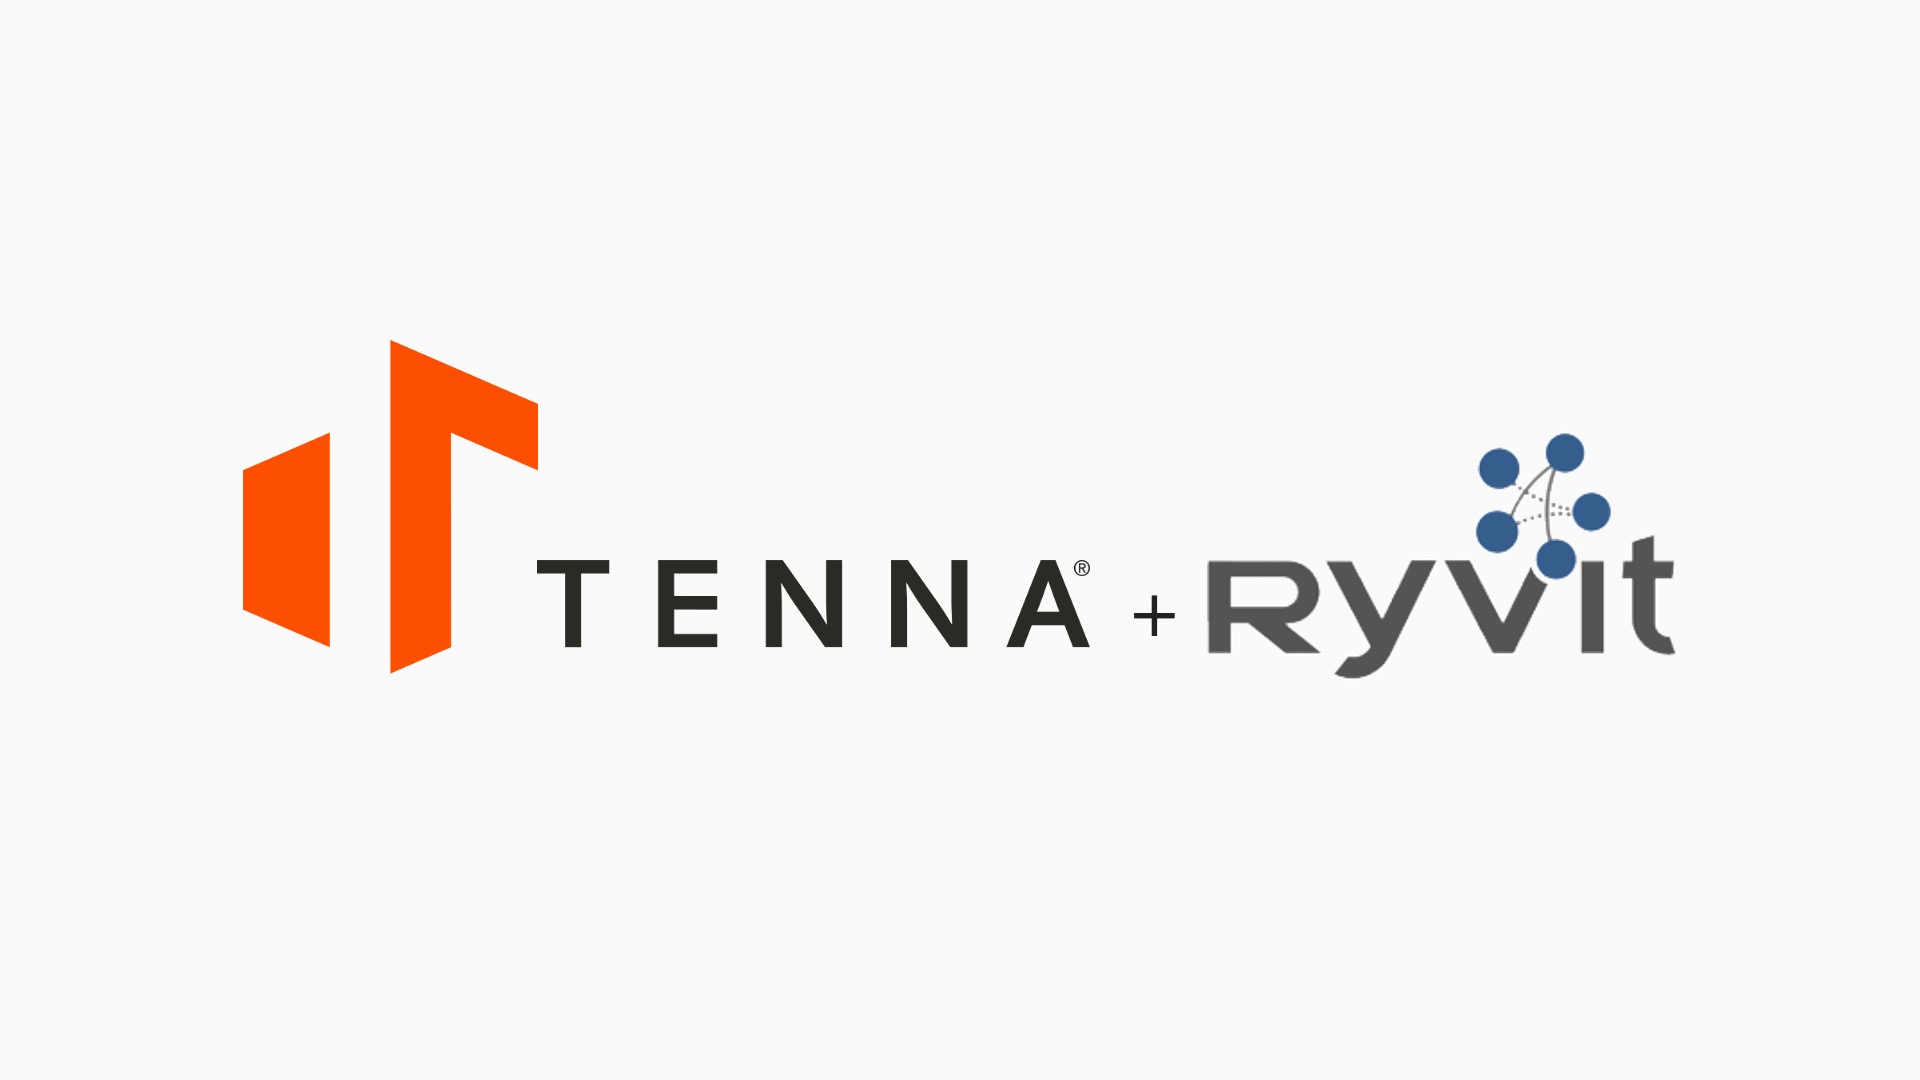 Tenna and Ryvit logos in color